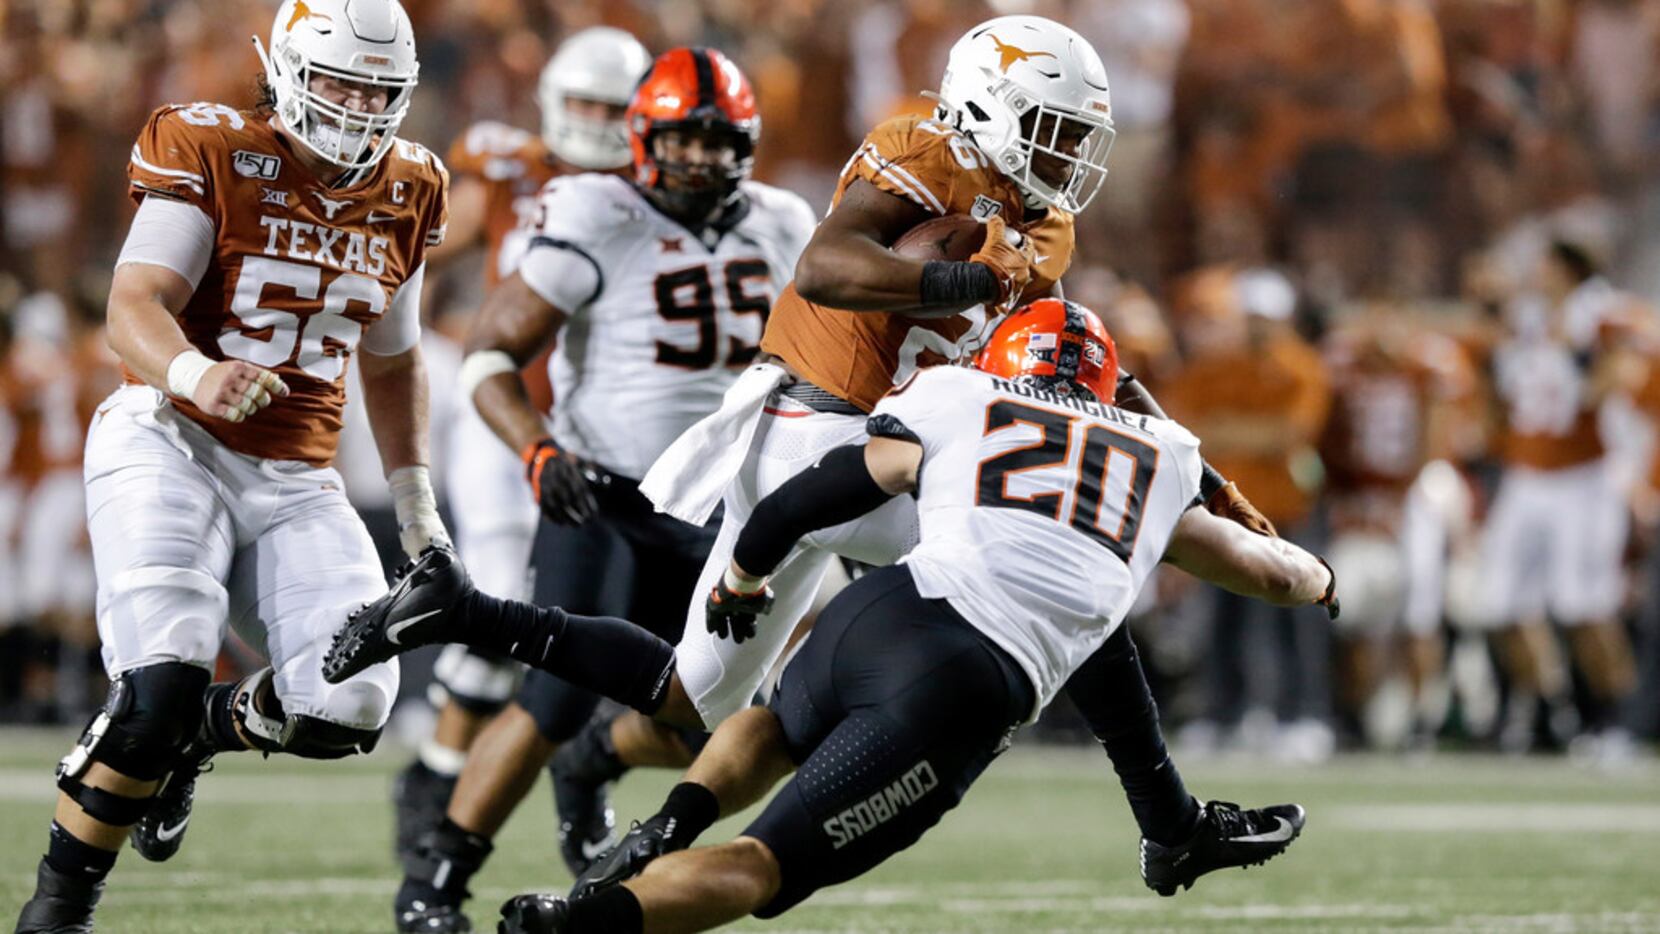 Keaontay Ingram #26 of the Texas Longhorns runs the ball in the fourth quarter defended by...